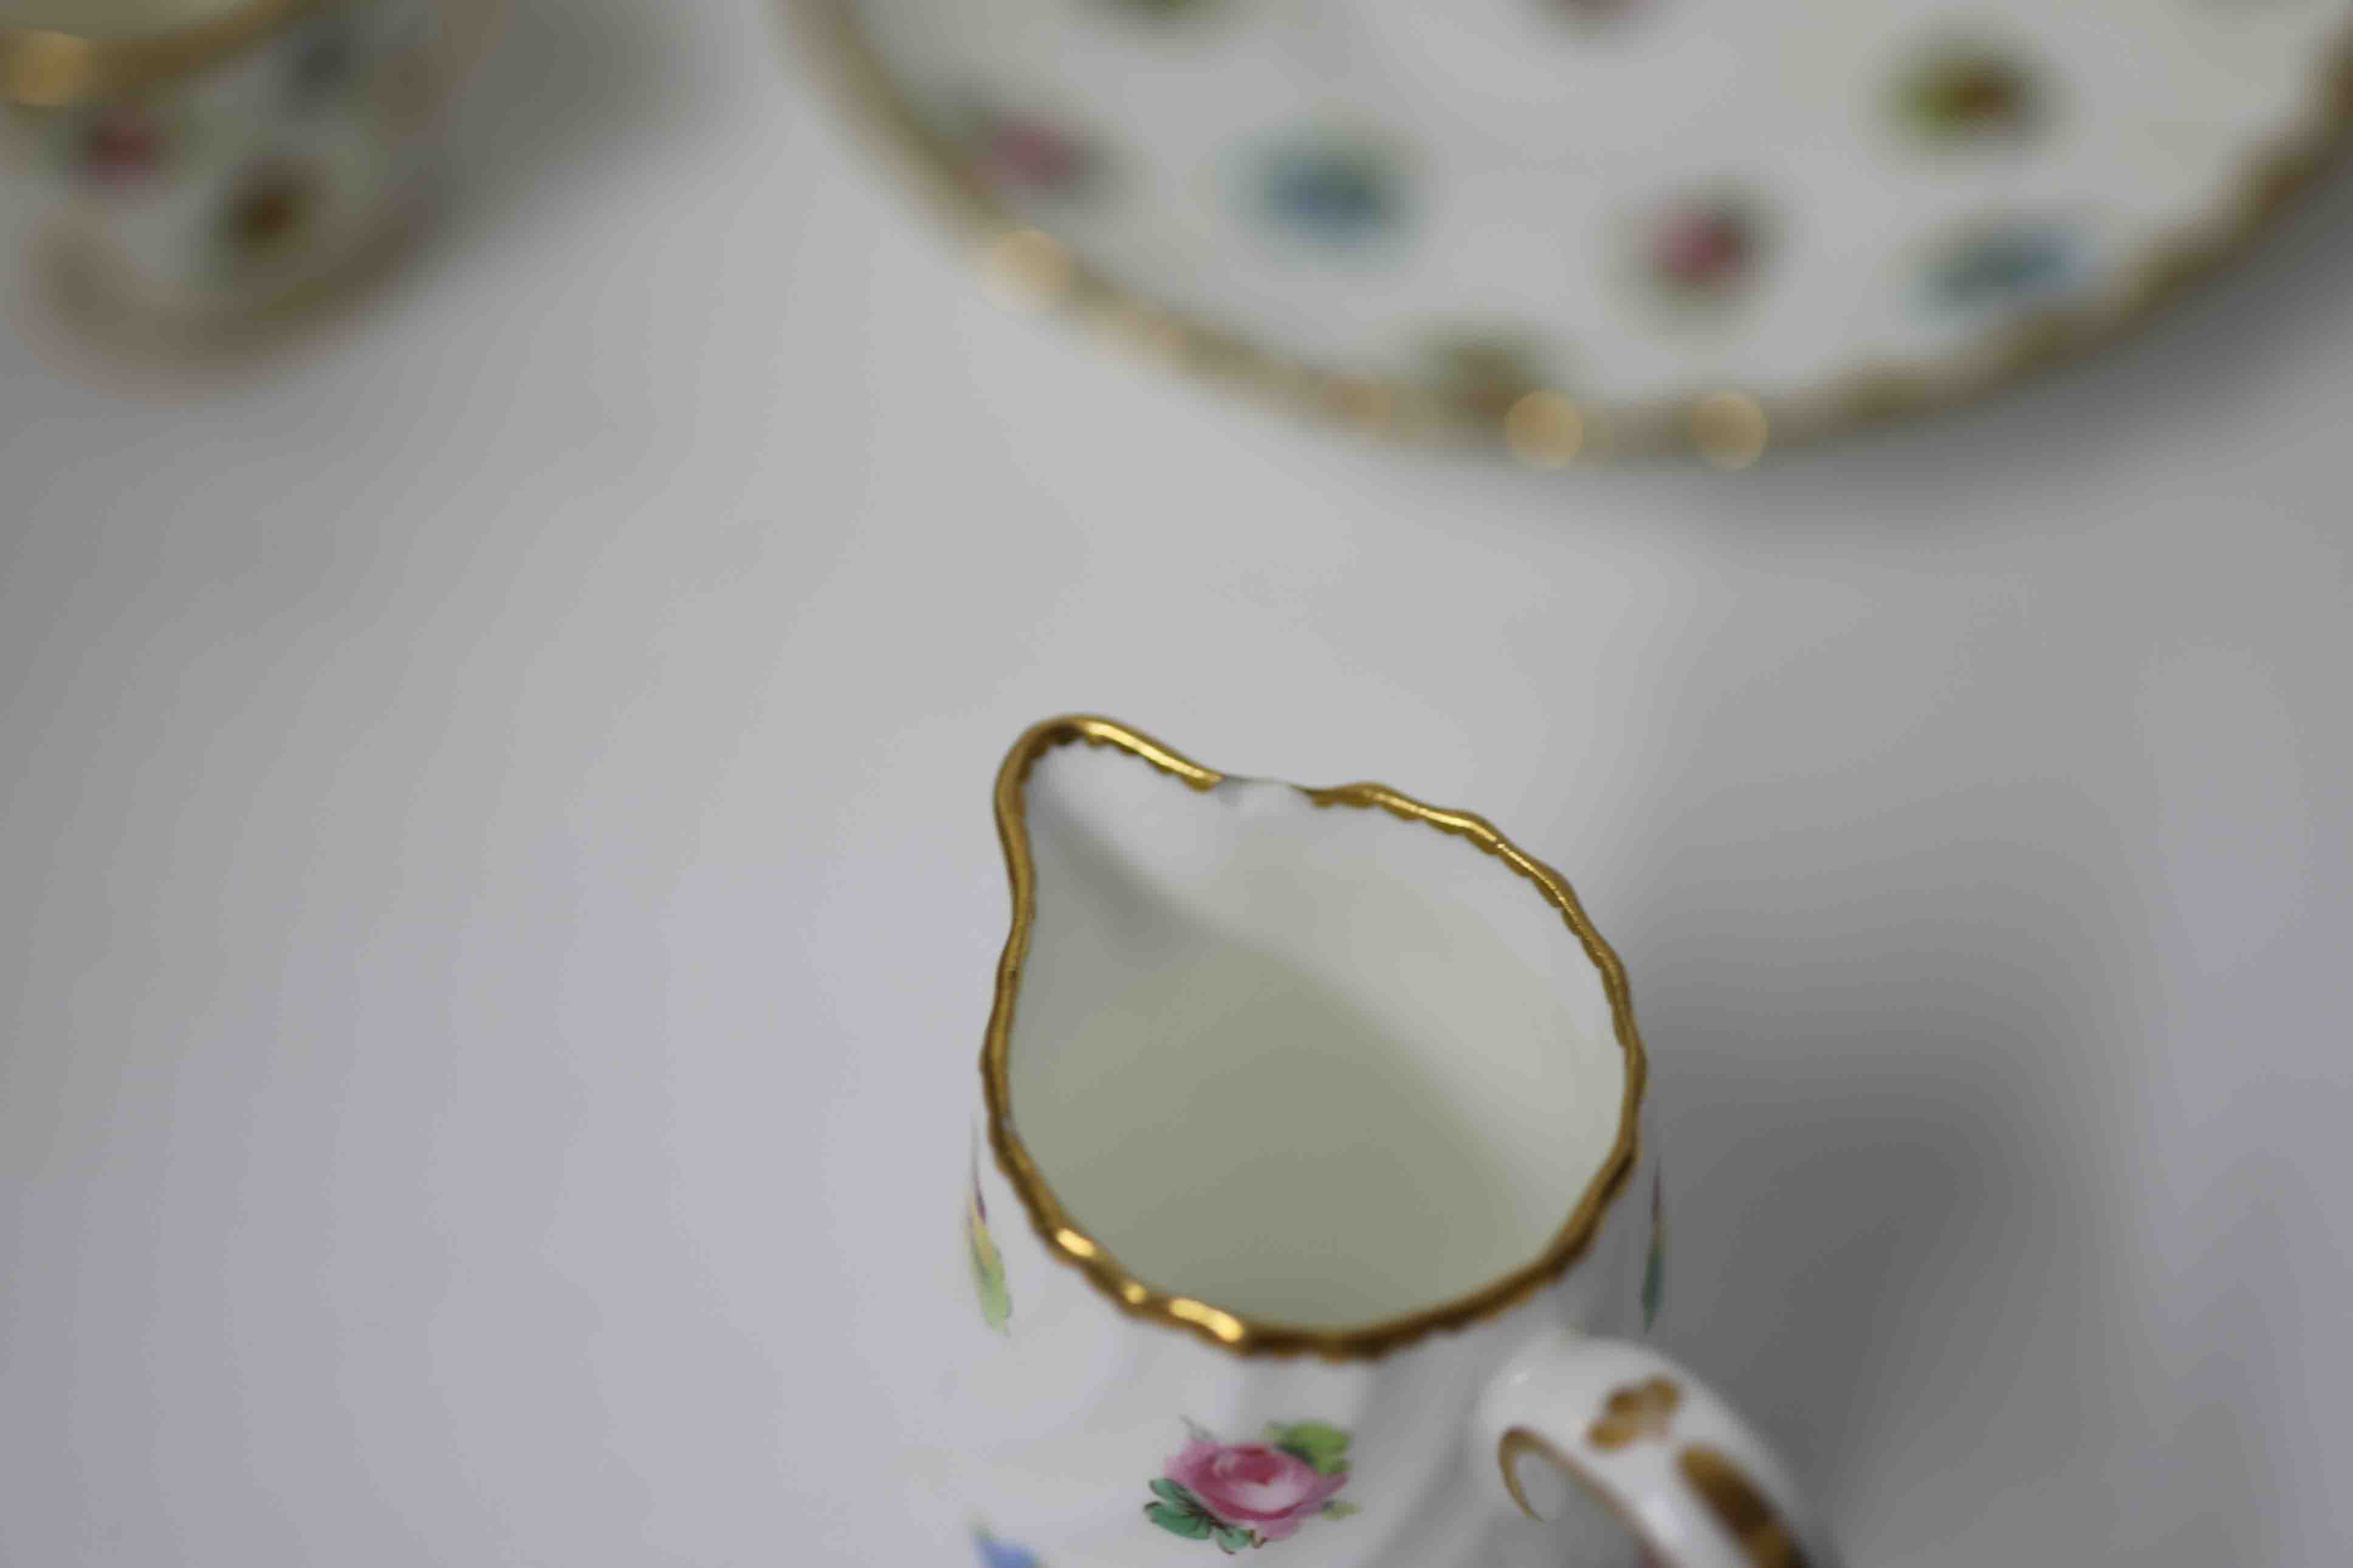 A Minton's part porcelain and floral decorated teapot & tea for one service, Staffordshire porcelain - Image 10 of 12